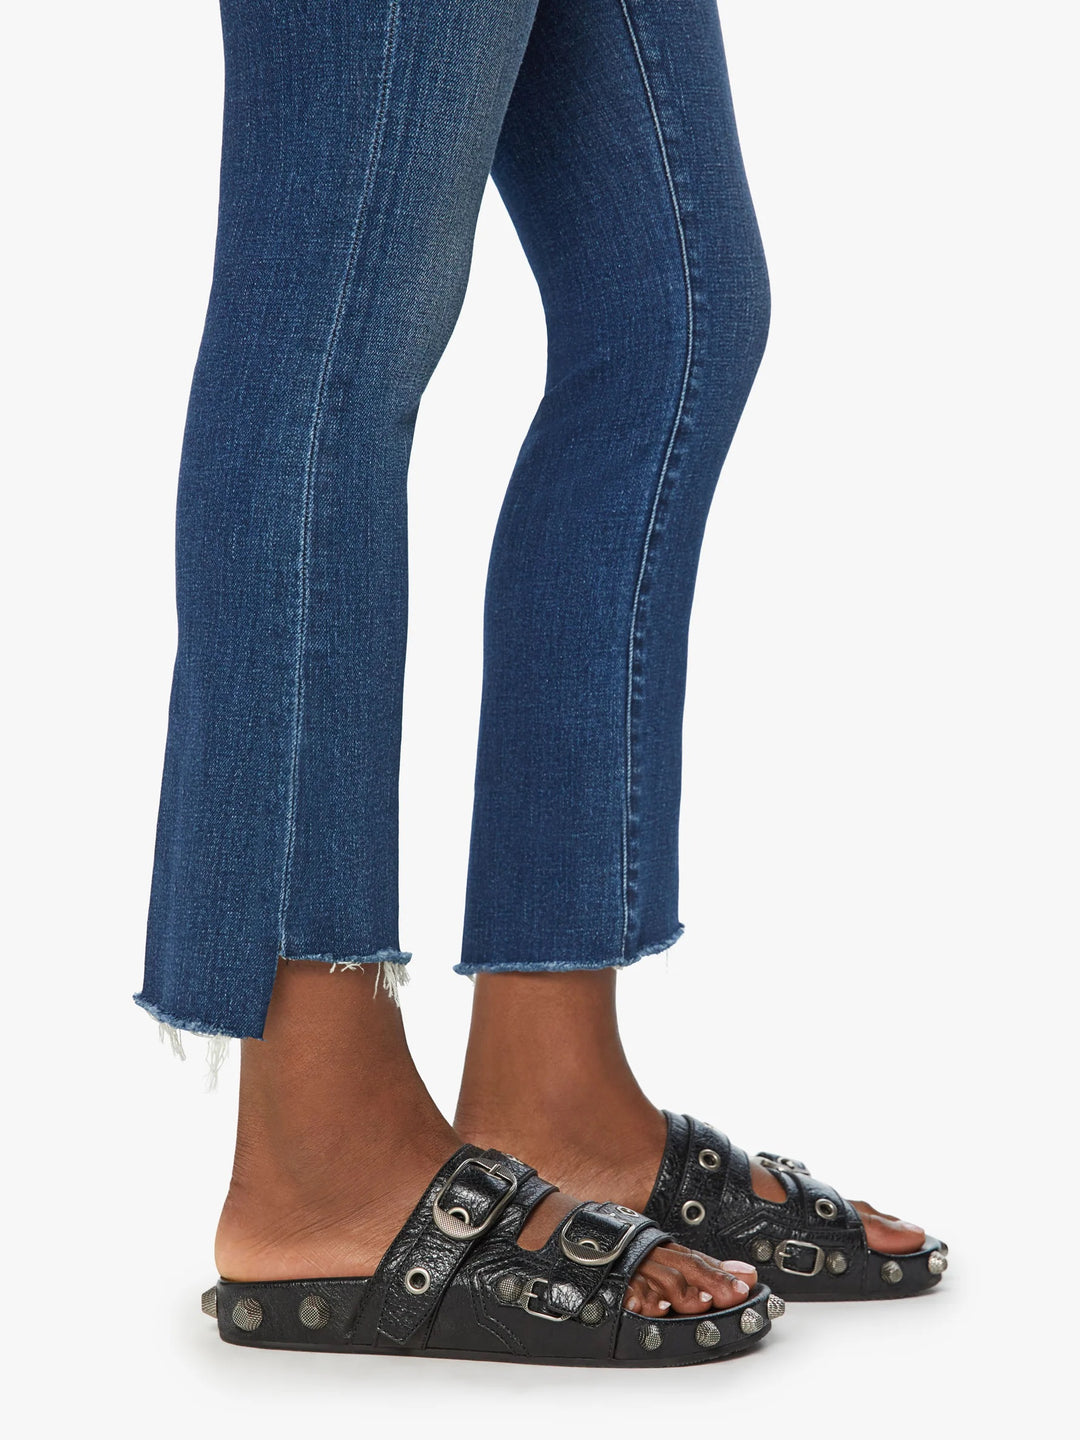 Mother - The Inside Crop Step Fray high-waisted bootcut is cropped at the ankle with a frayed step-hem.